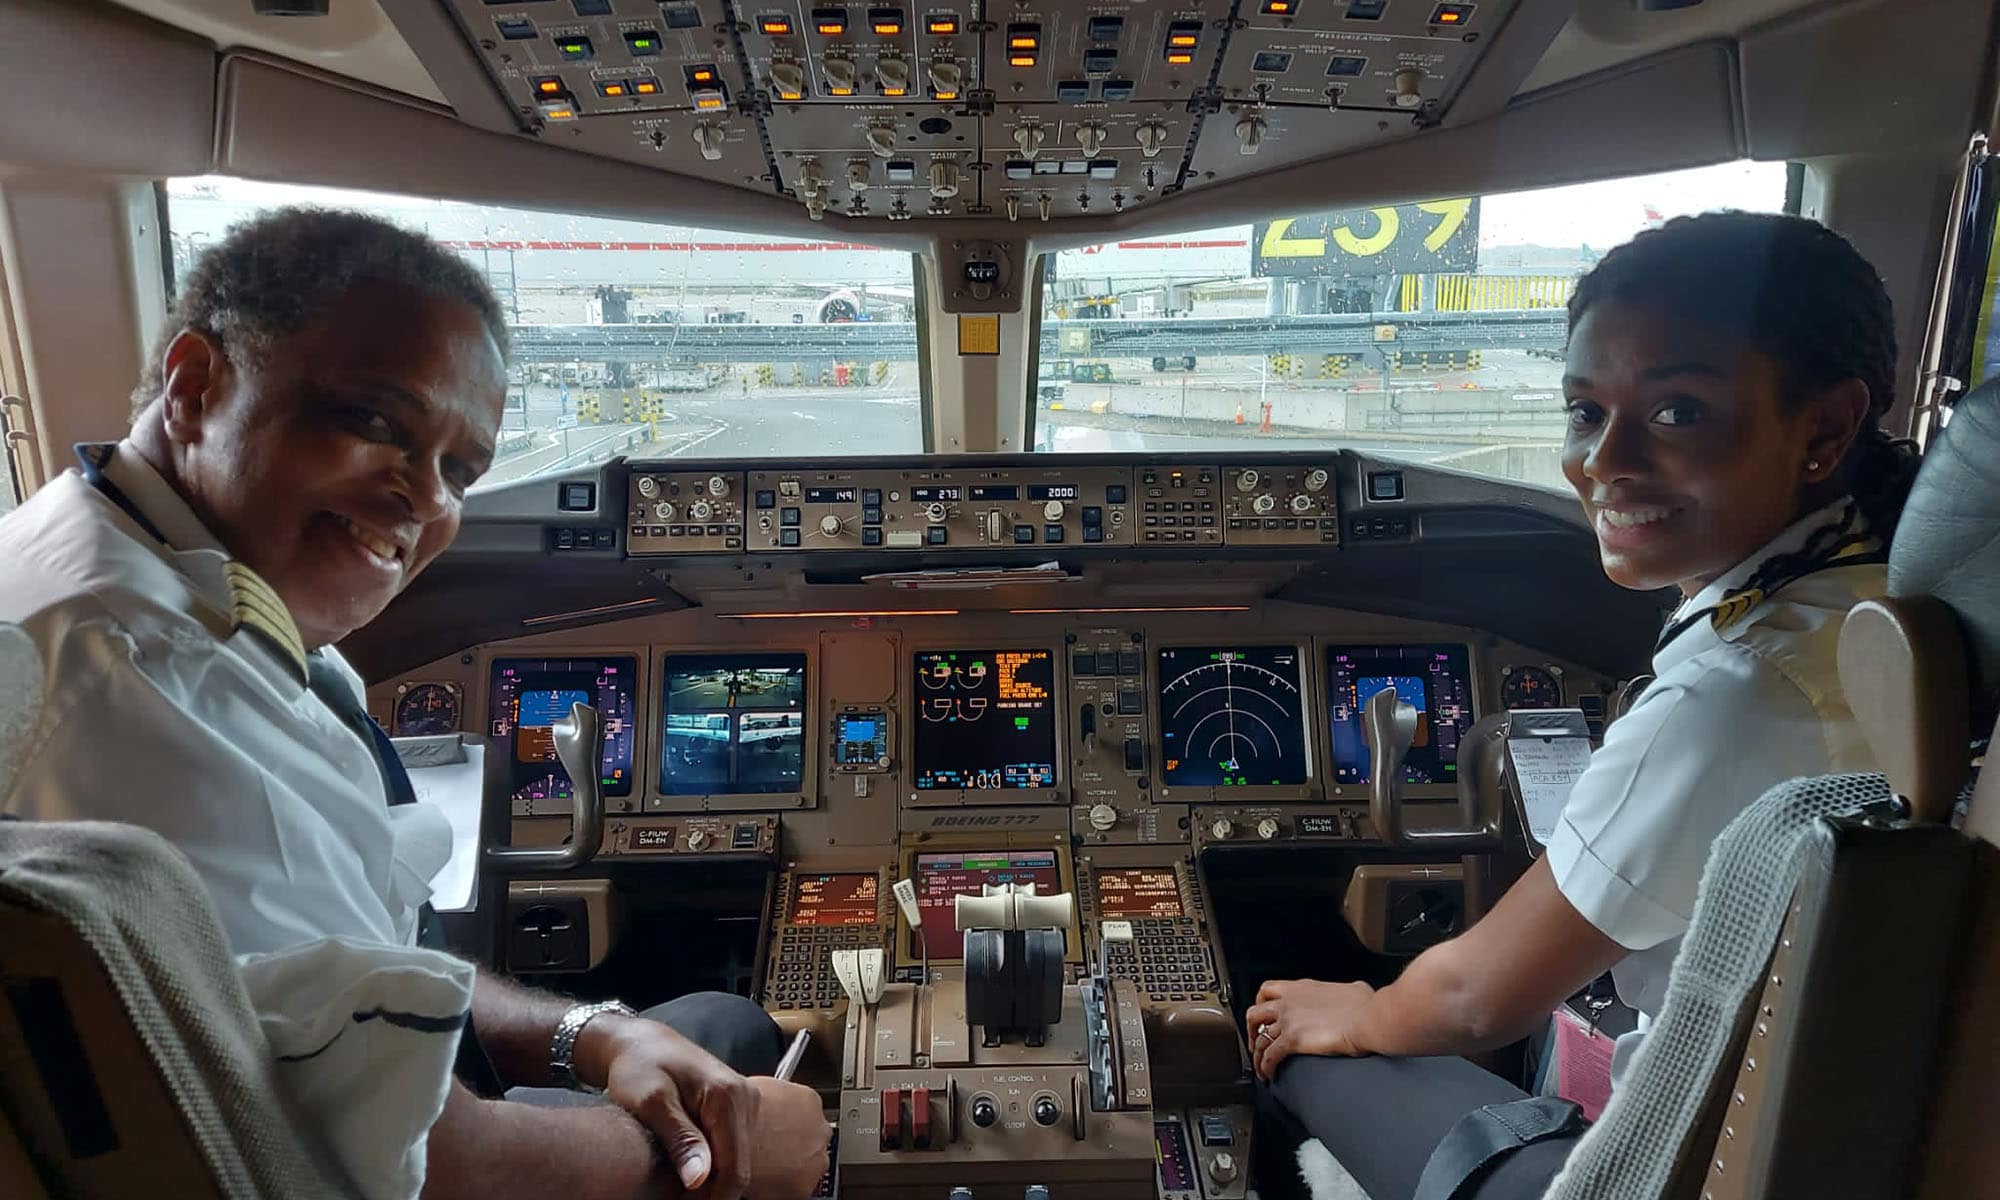 Embry-Riddle grad Zoey Williams is a Boeing 777 first officer at Air Canada who often shares the flight deck with her dad, Captain Orrett Williams. (Photo: Zoey Williams)